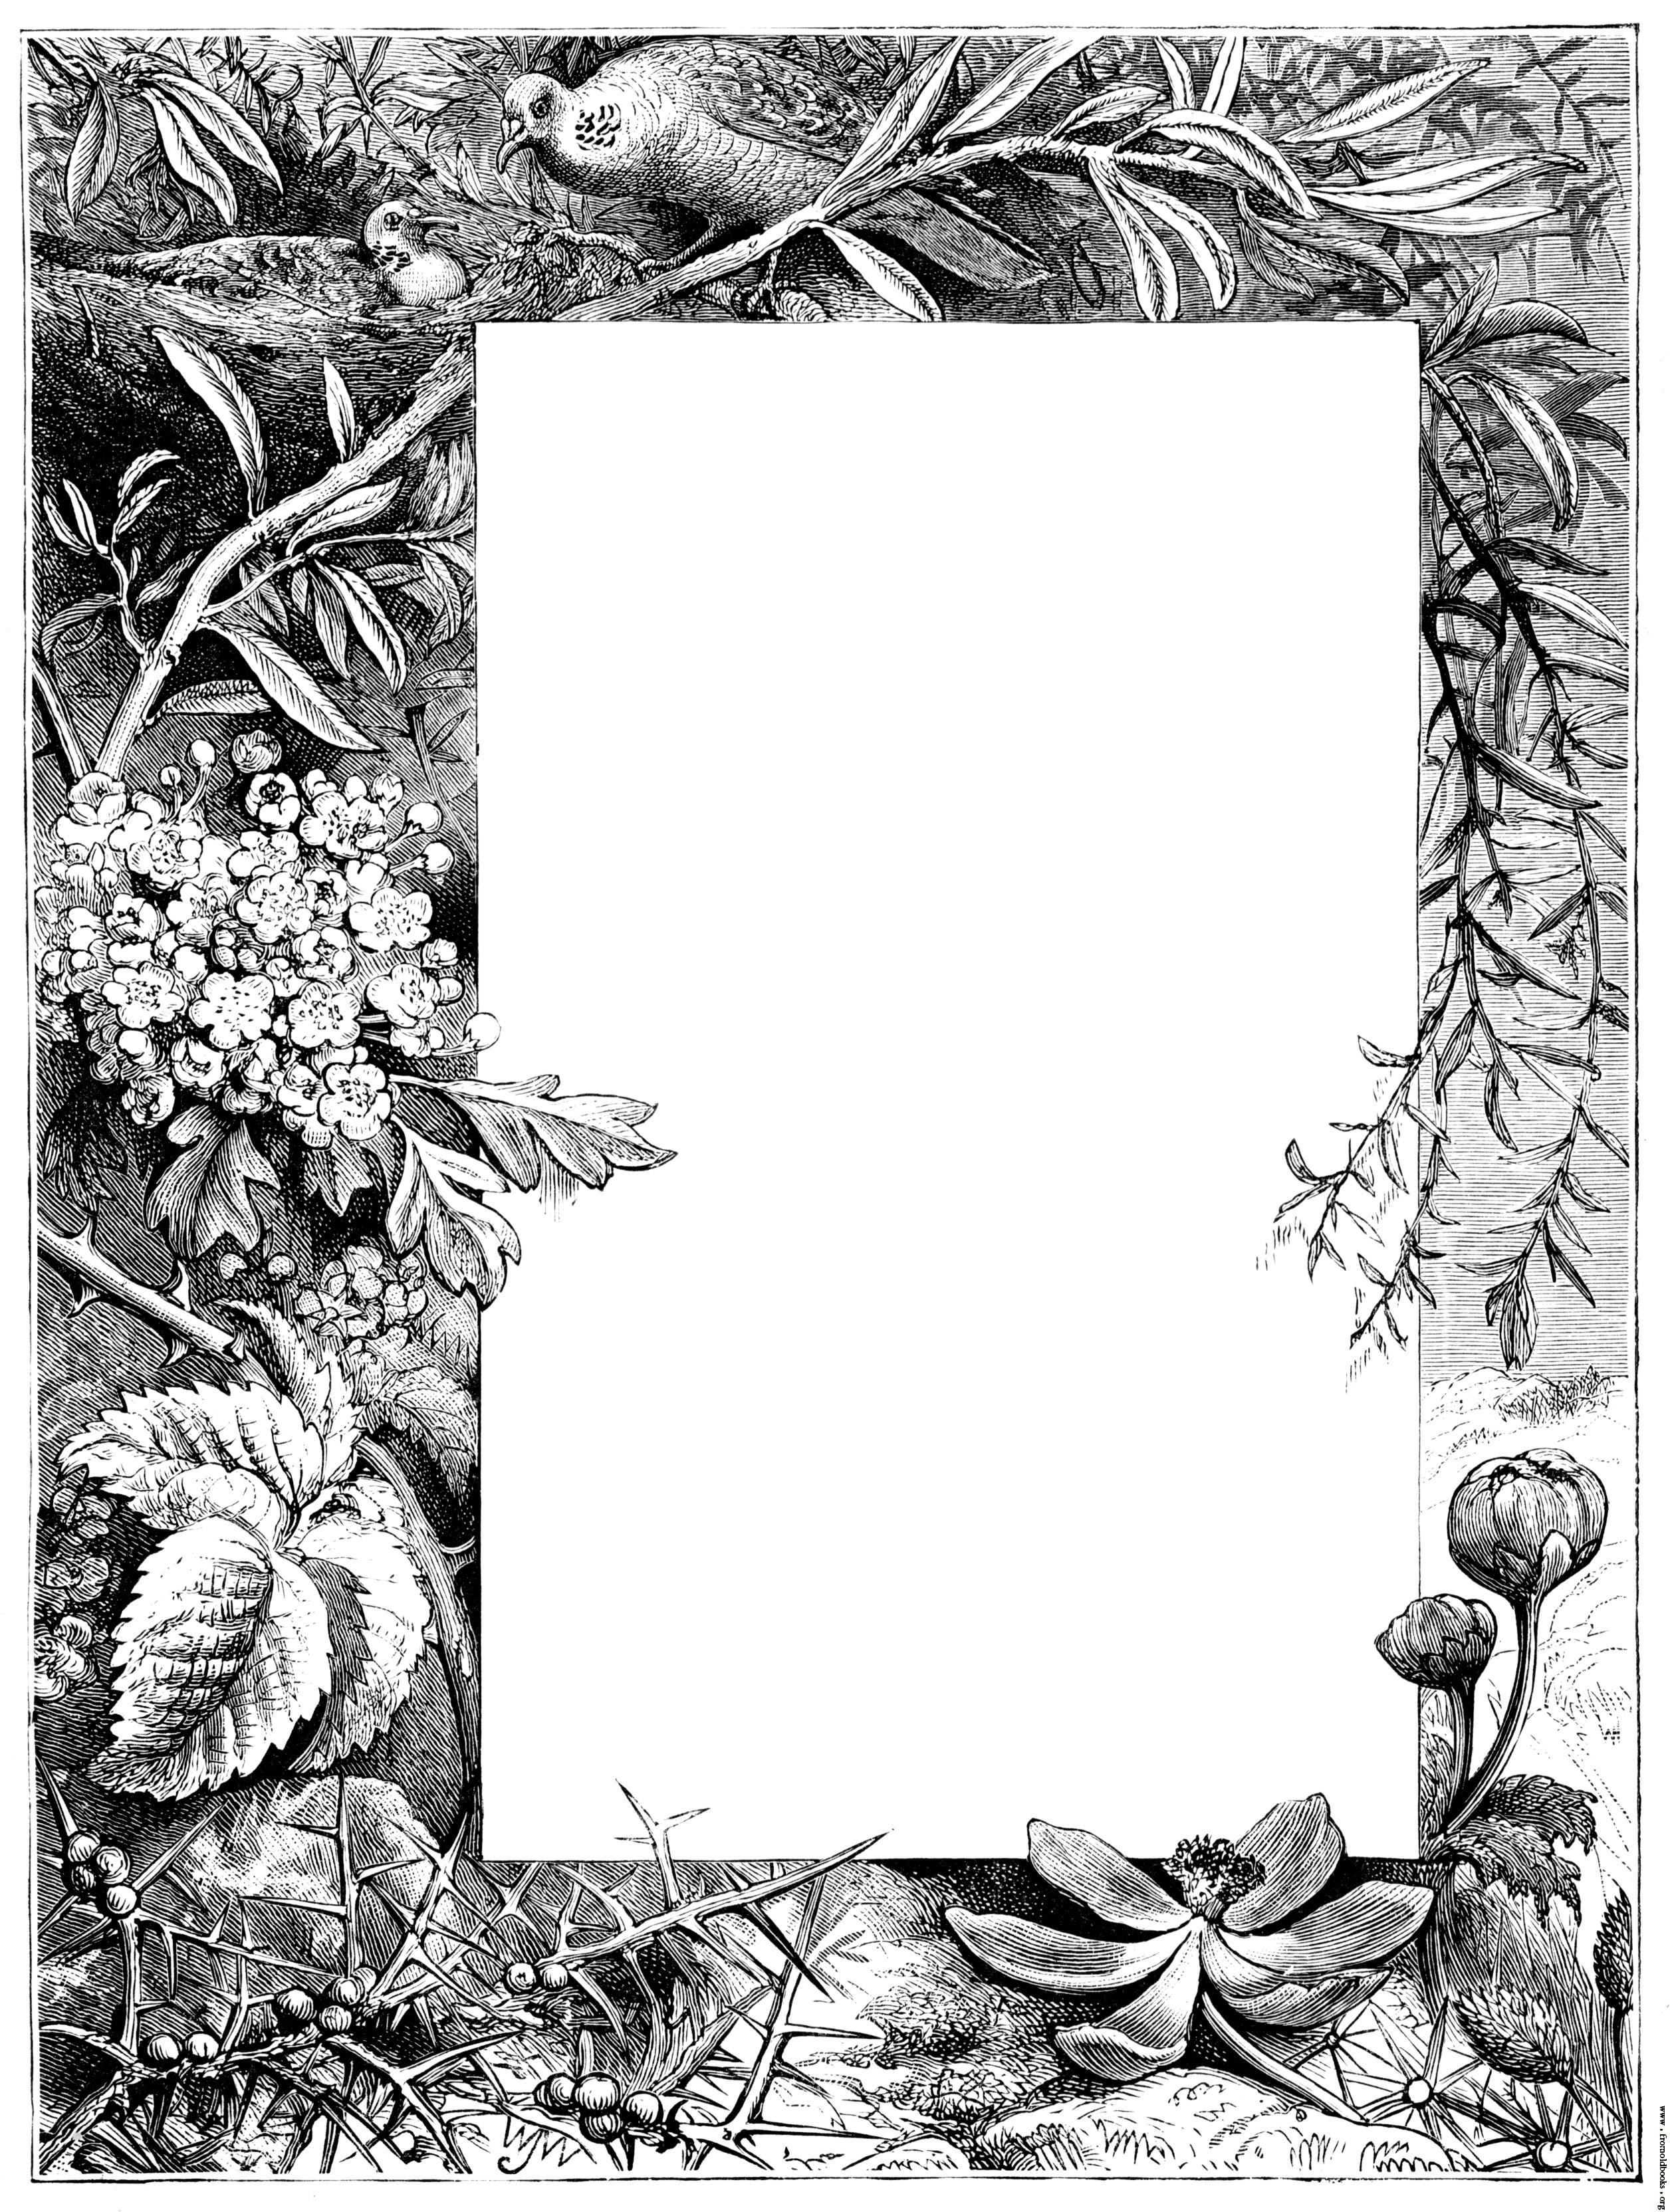 Border of flowers from title page